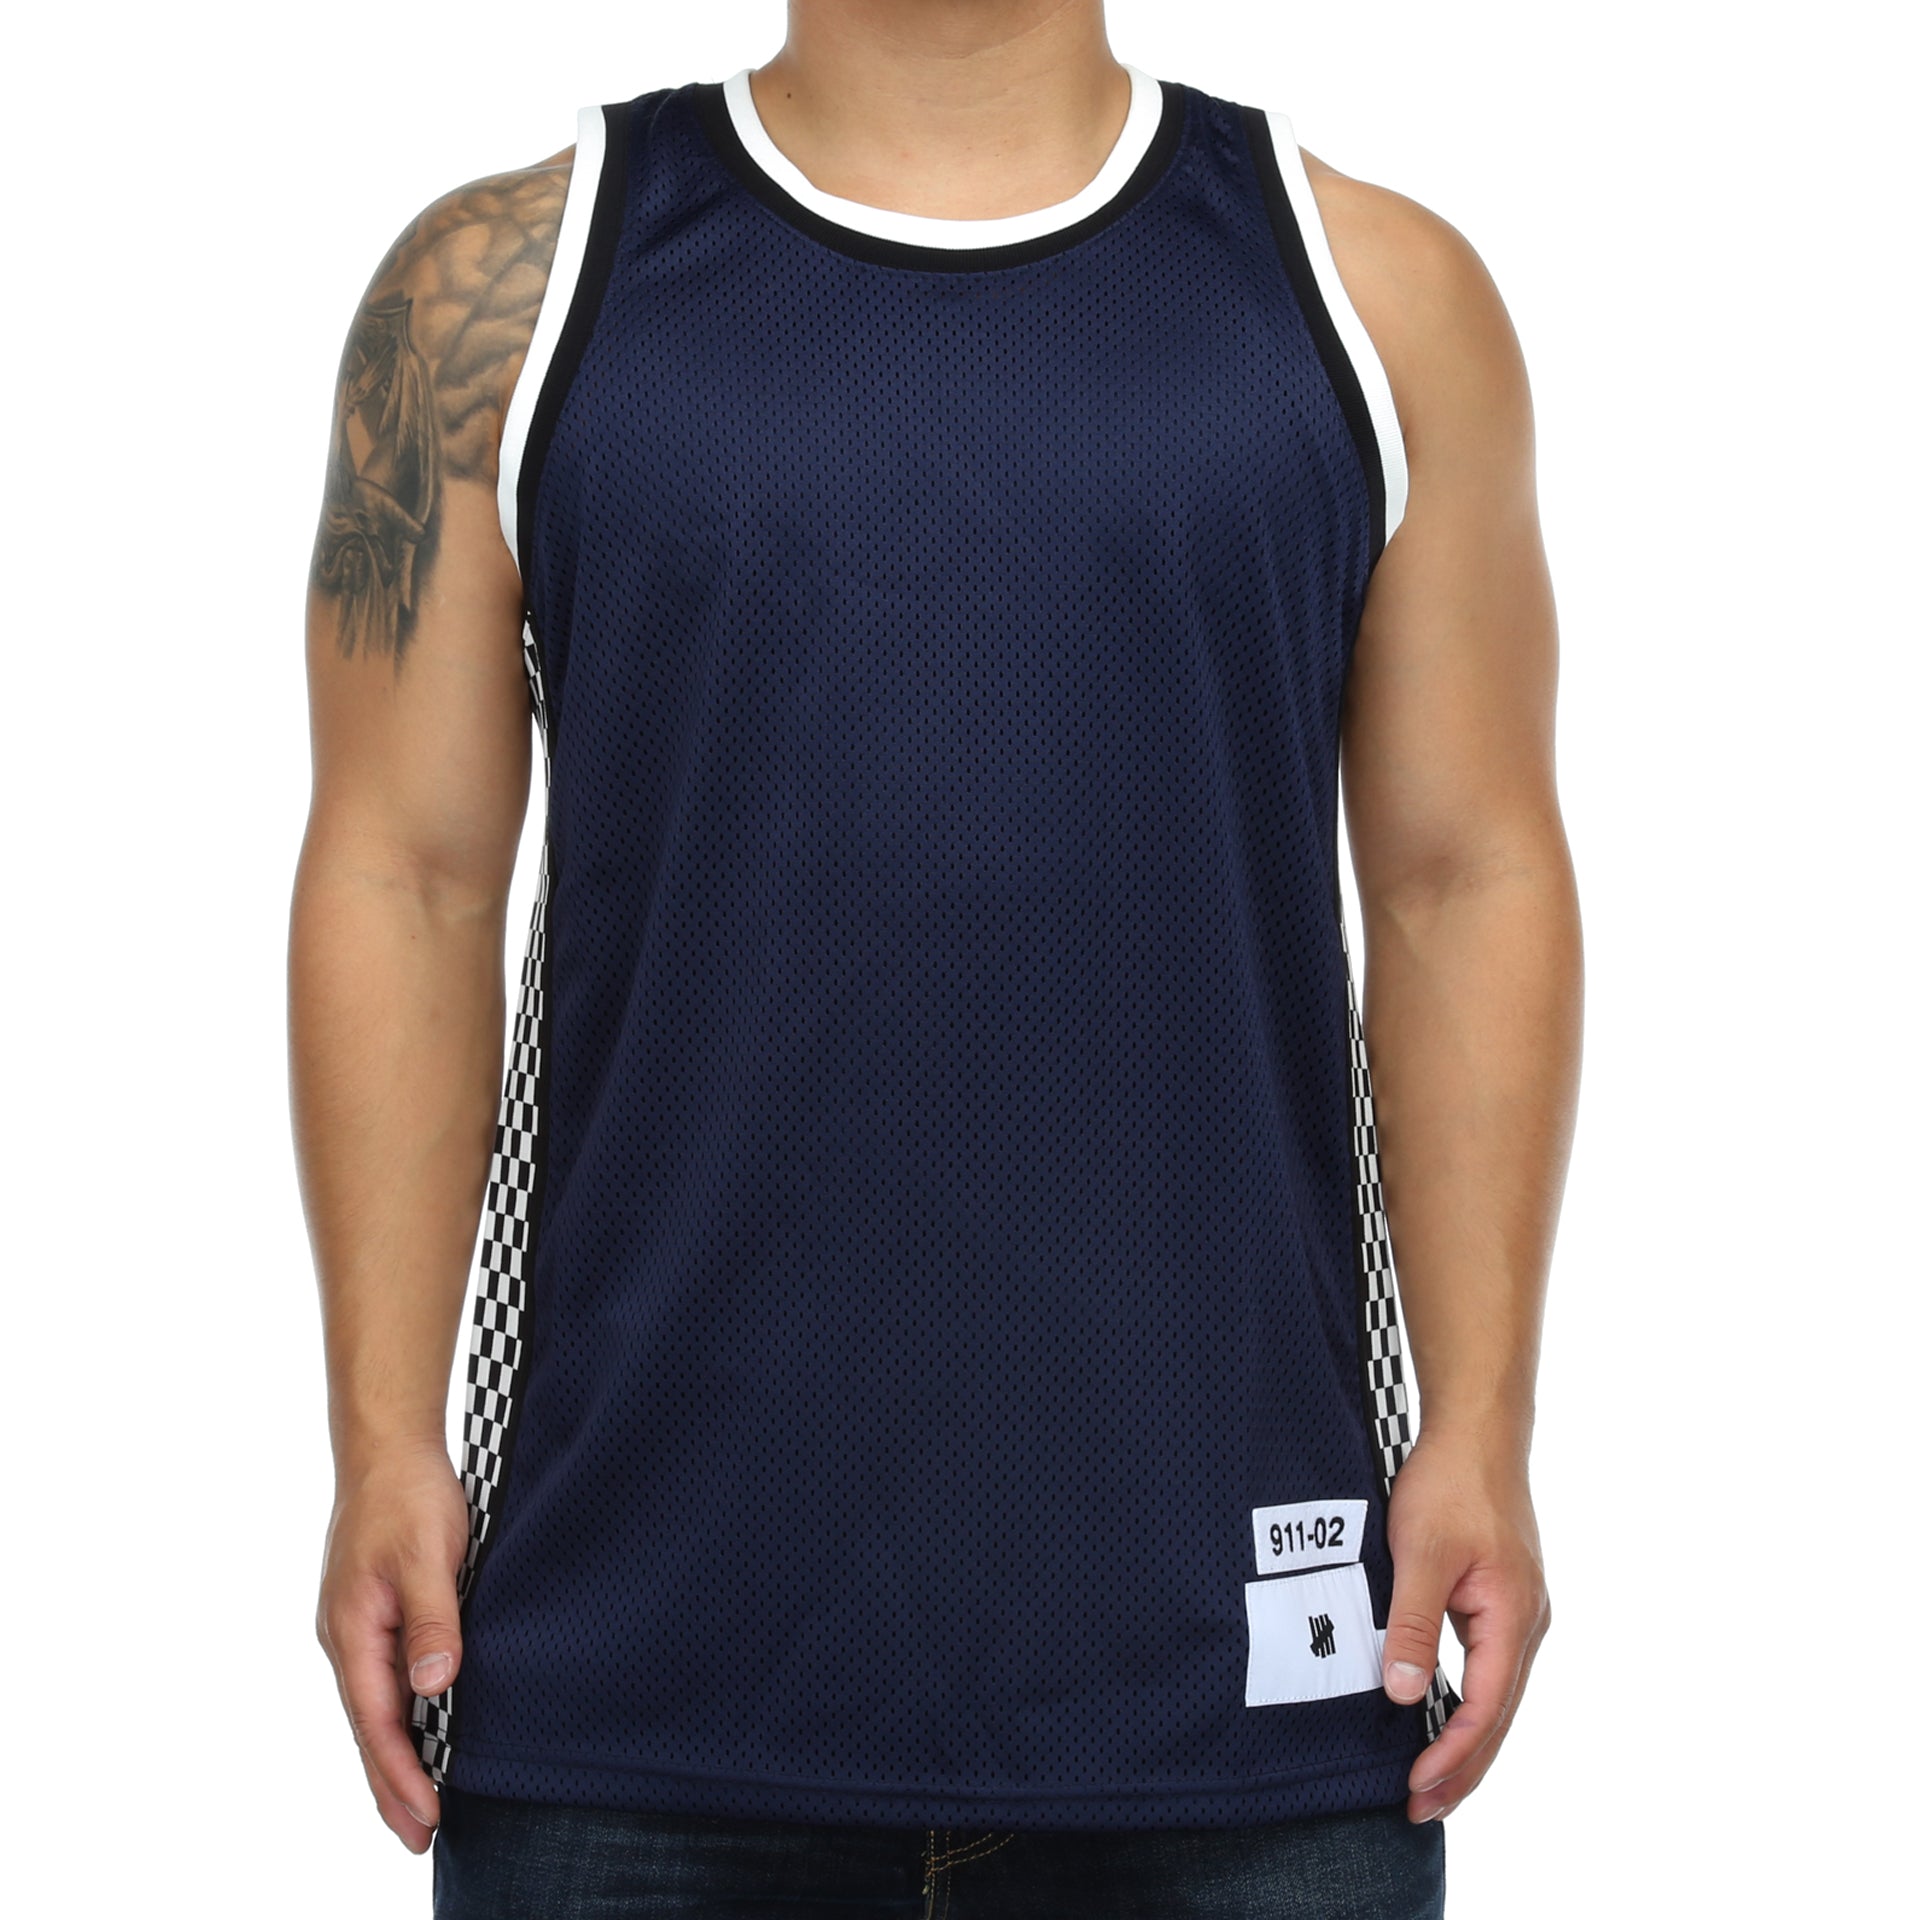 Undefeated Finish Line Basketball Jersey - Navy - New Star